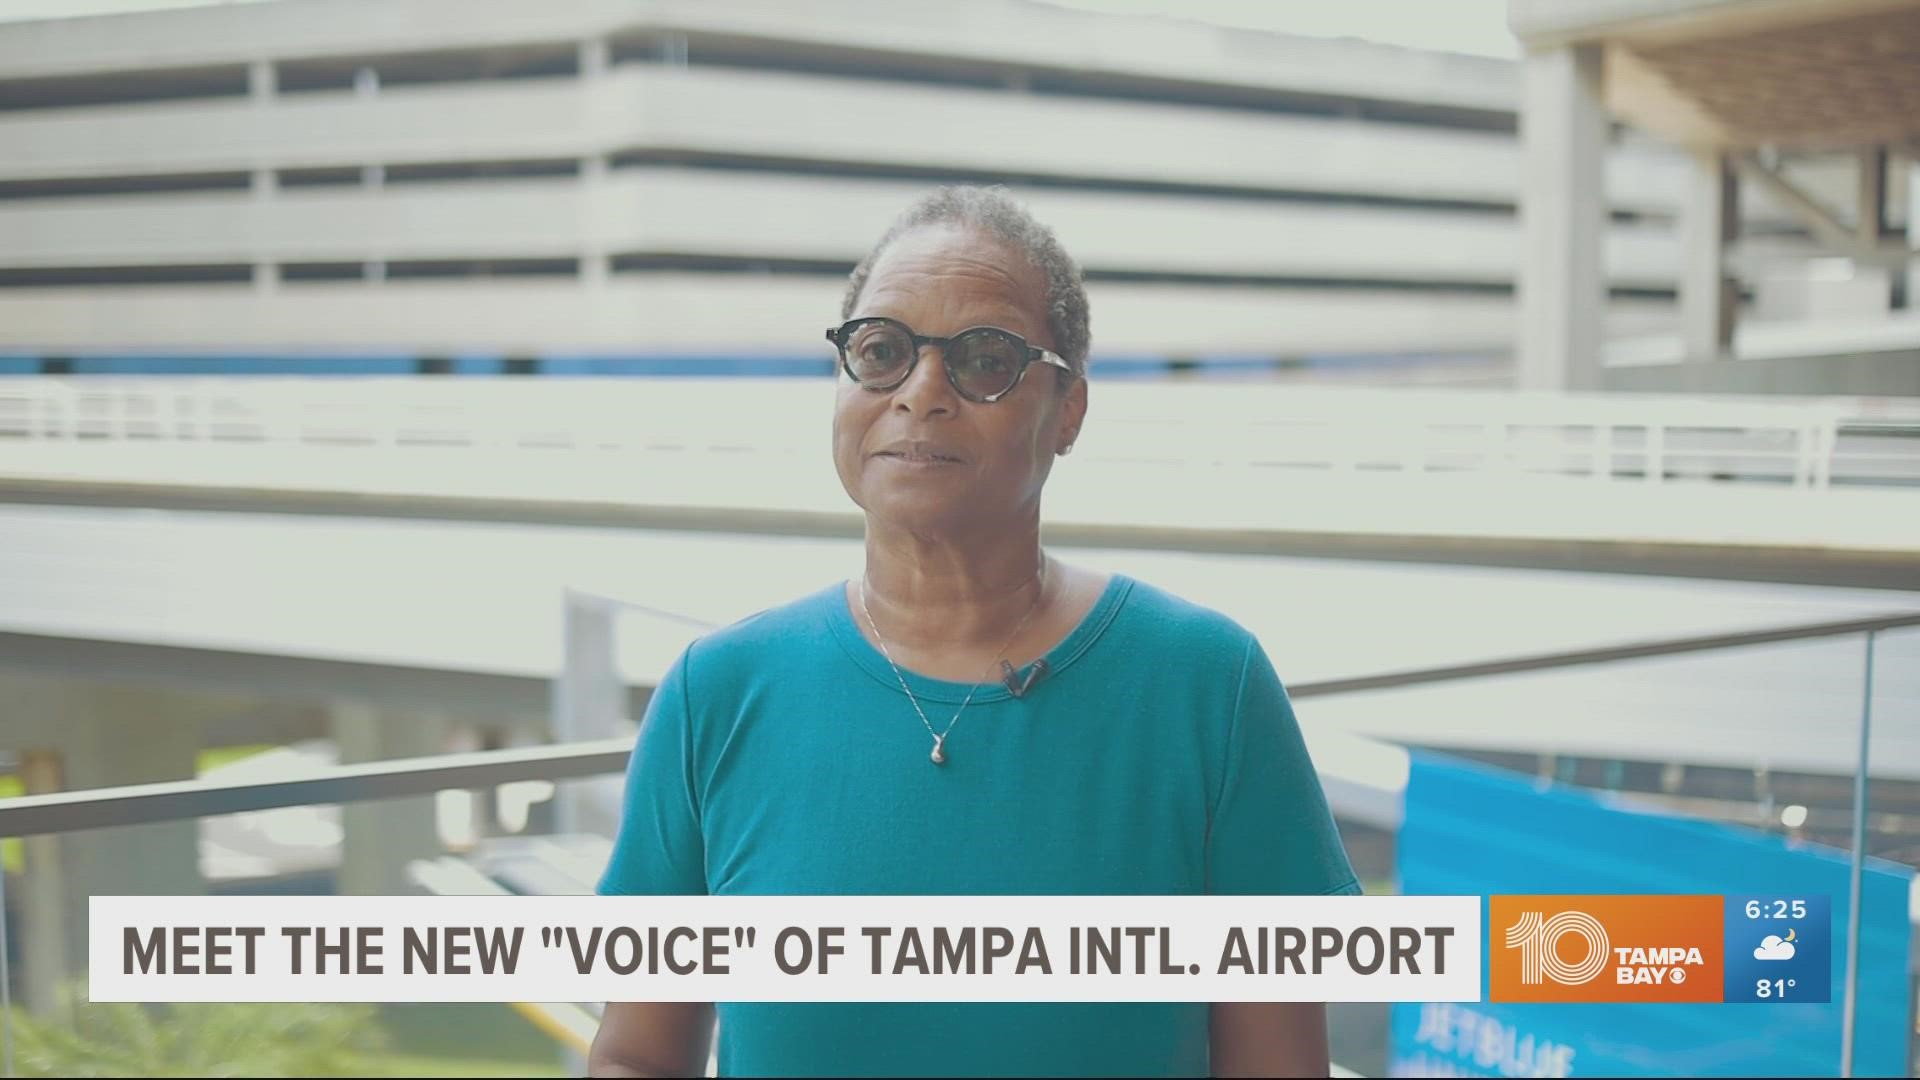 The retiree from Beverely Hills in Citrus County talked her way into winning the 2022 Voice of TPA contest.